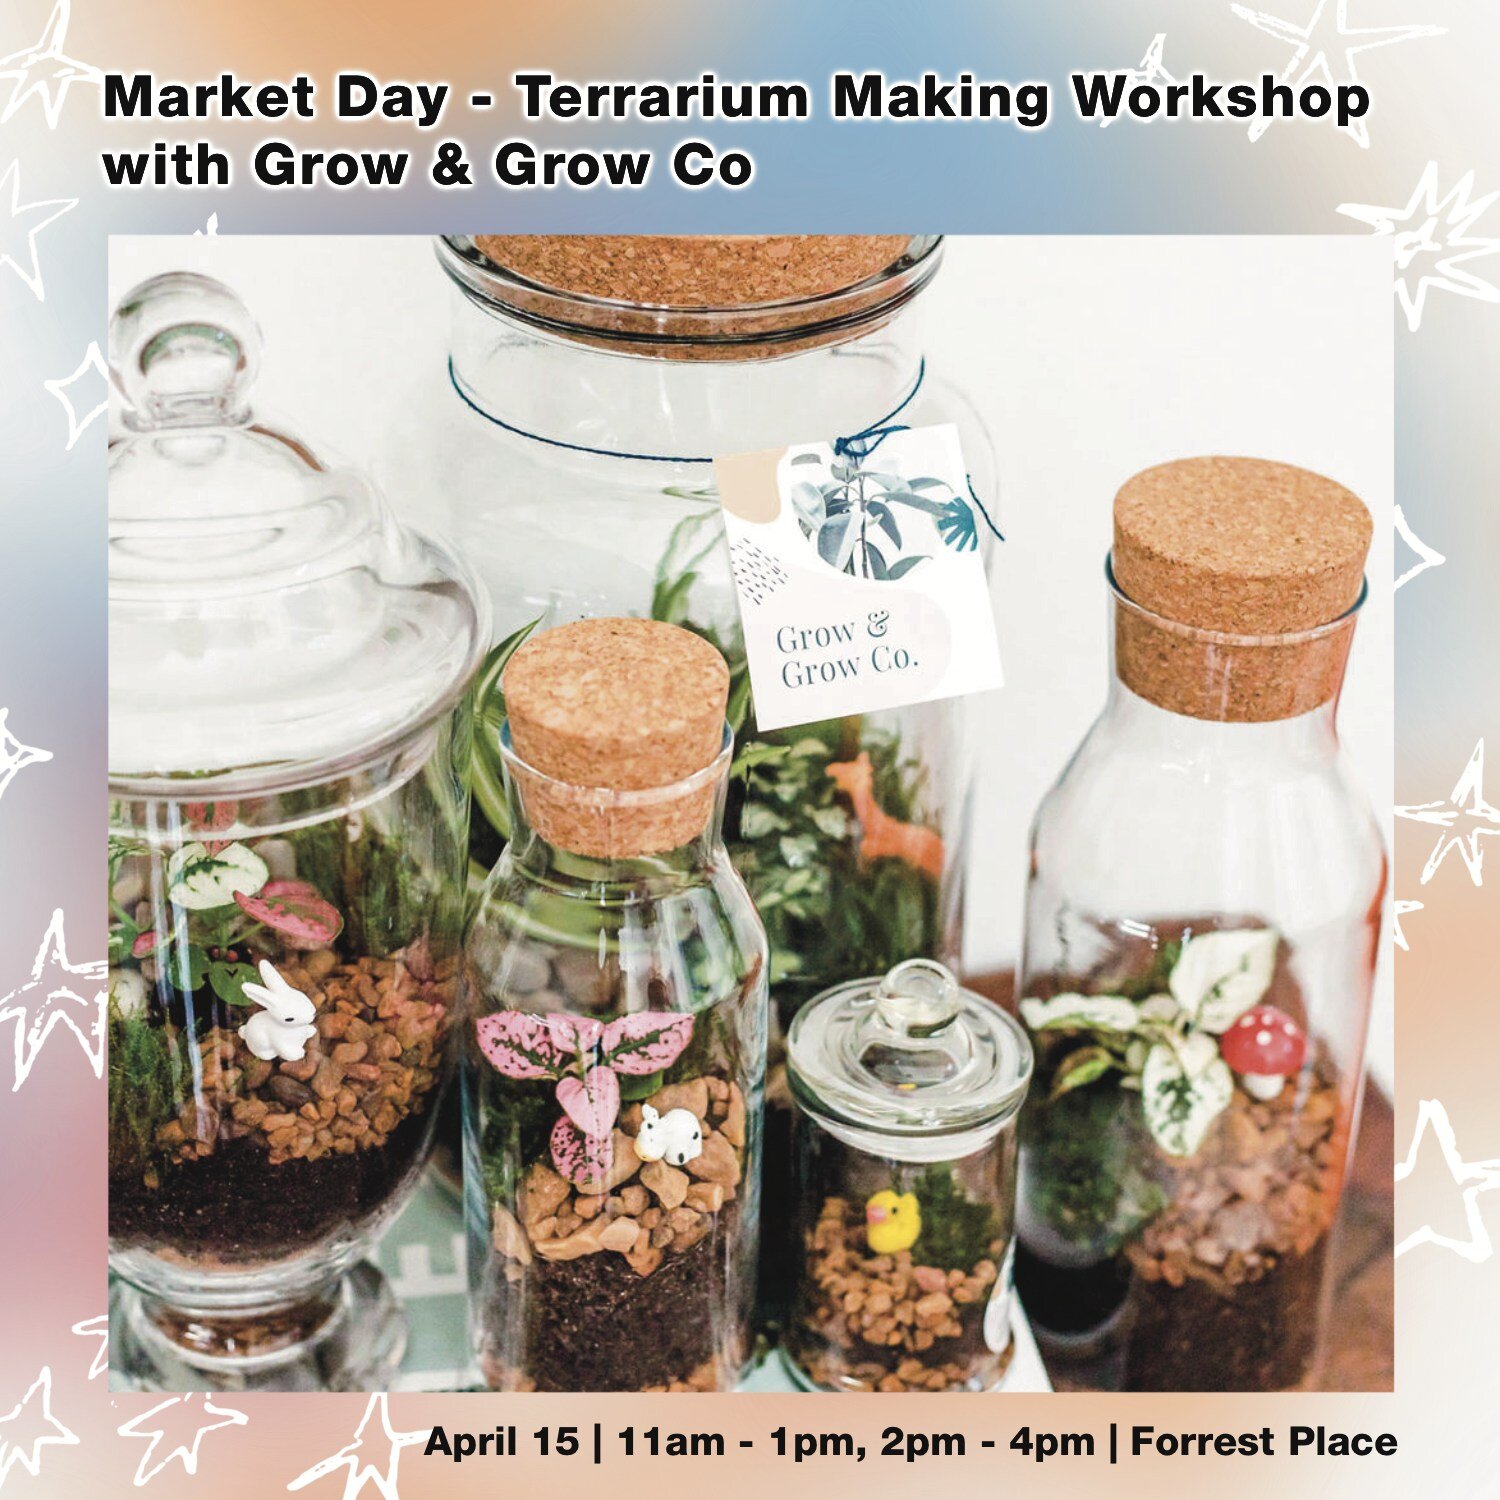 Terrarium Gardenscape Workshop will be at Market Day! 🌿🌱

Roll up your sleeves and join Kaylie Bodeker from @growandgrowco to make your very own magical terrarium wonderland. The perfect self watering, low maintenance house plant! Workshops are on 